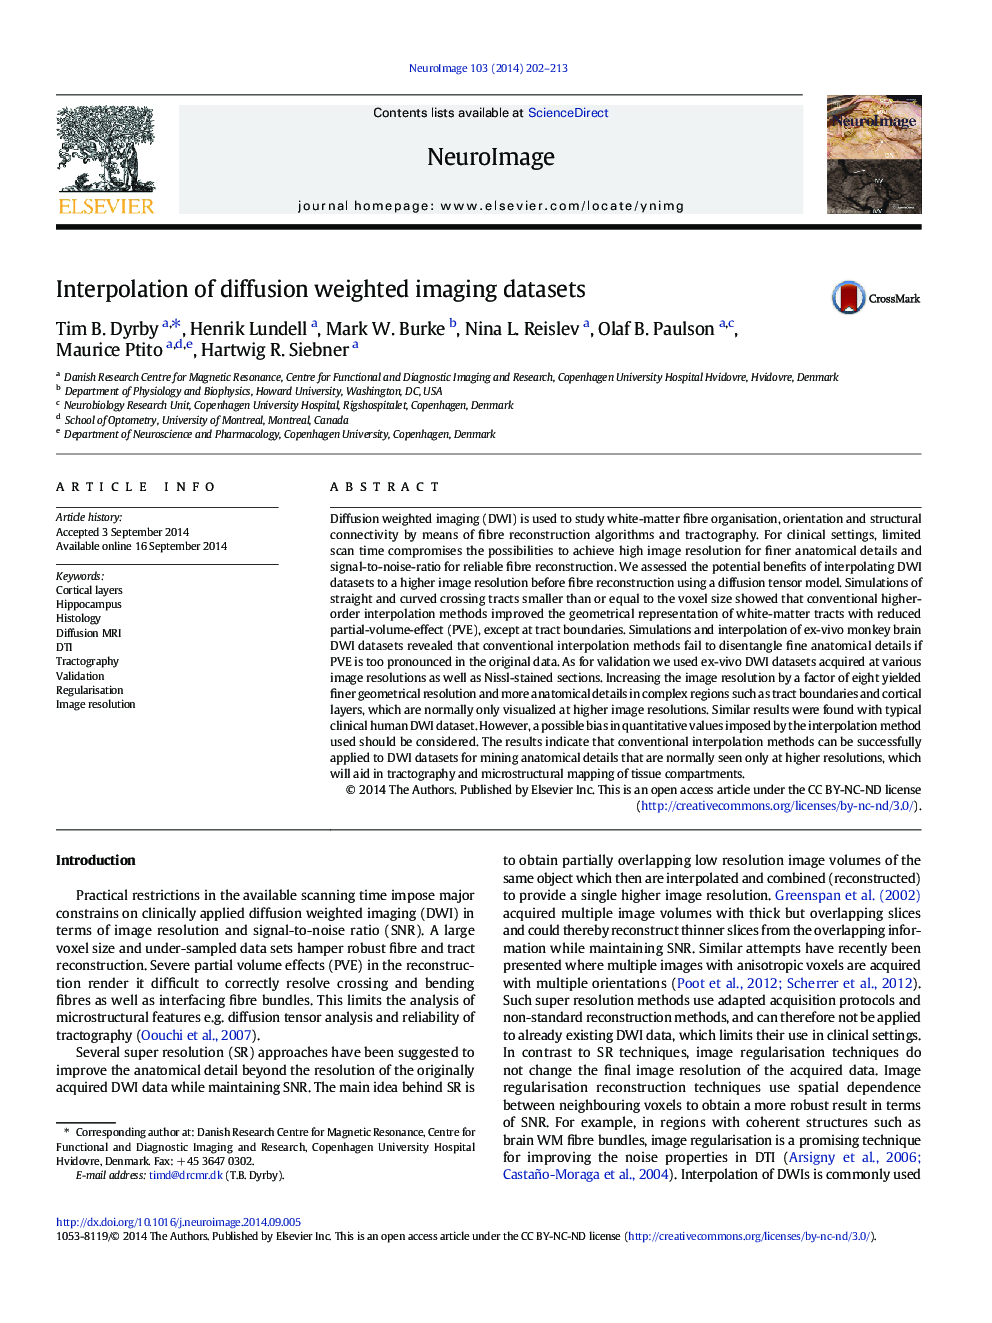 Interpolation of diffusion weighted imaging datasets